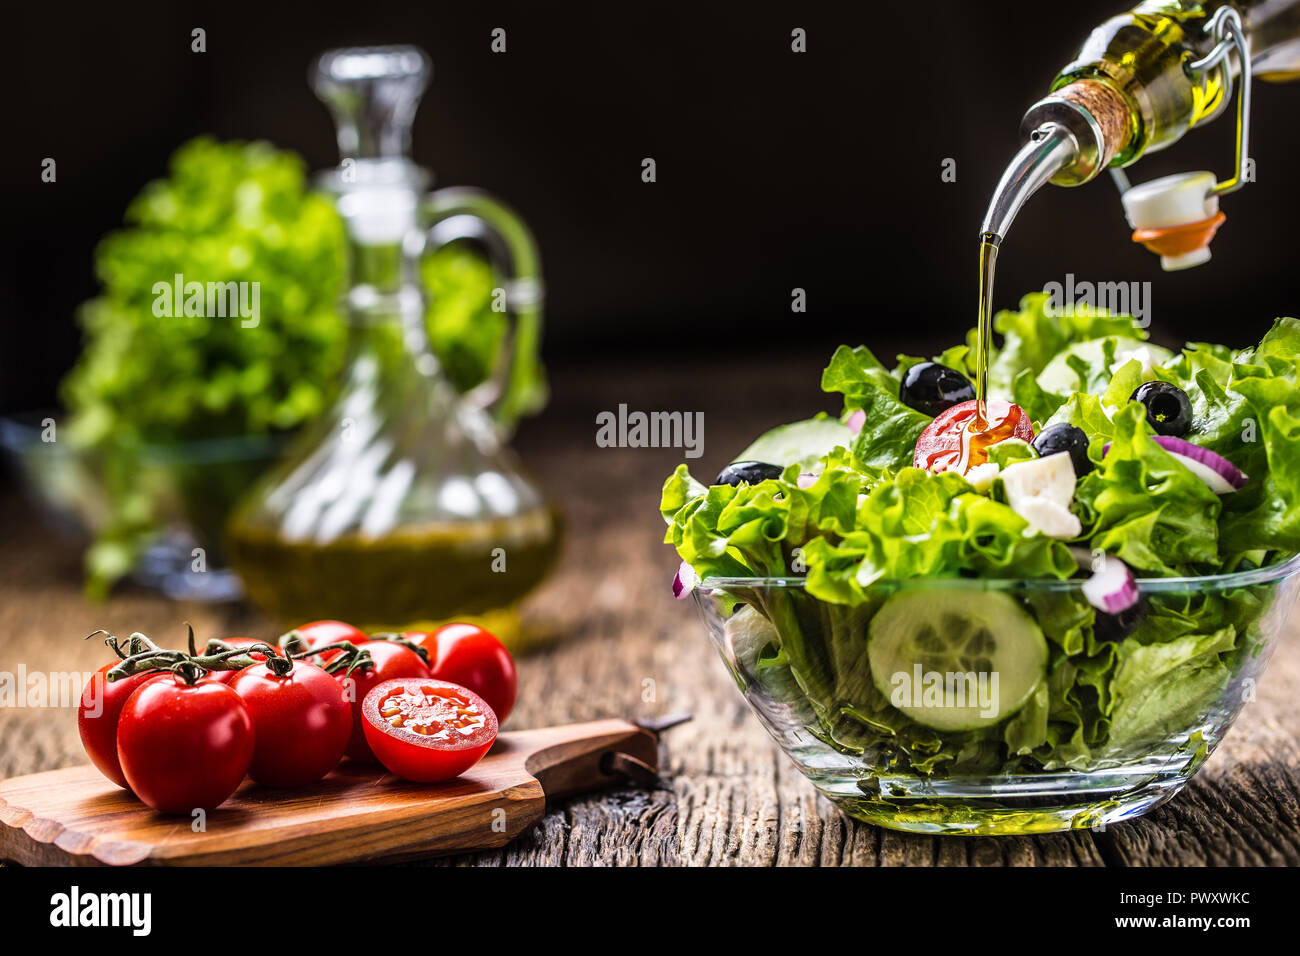 Vegetables lettuce salad with tomatoes onion cheese and olives. Olive oil pouring into bowl of salad. Stock Photo